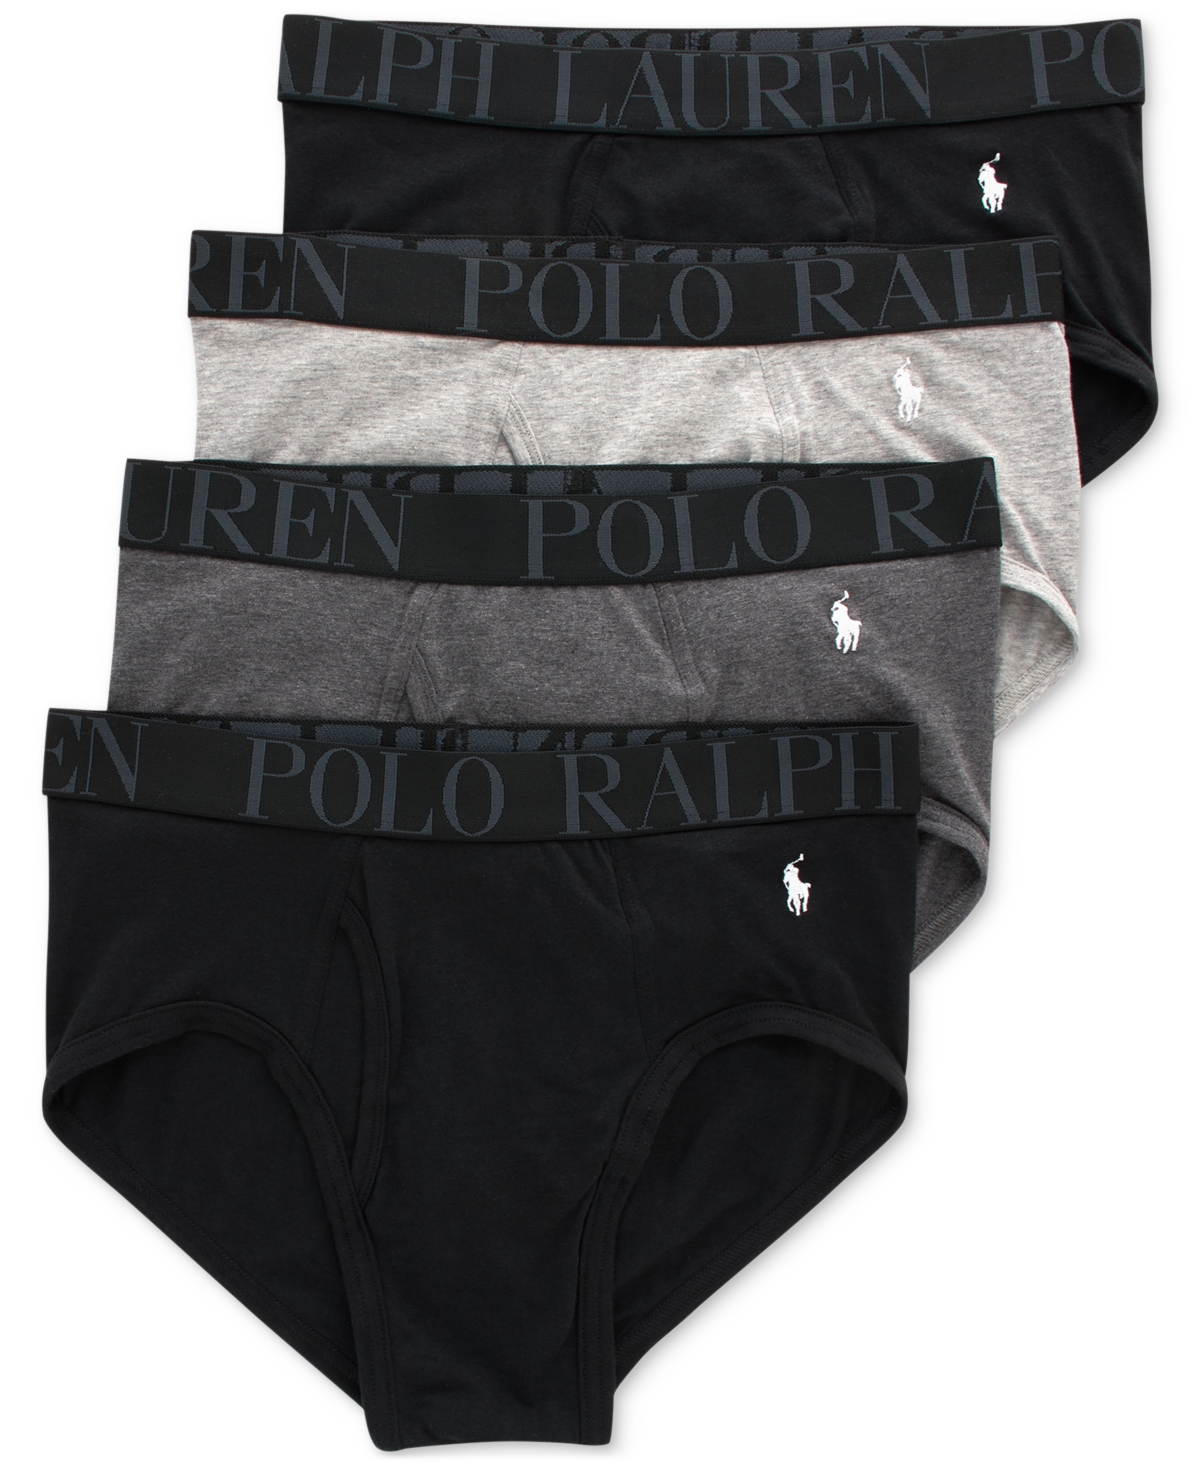 Polo Ralph Lauren Men's 4-pack Classic Stretch Briefs In Polo Black,andover Heather,charcoal Heat